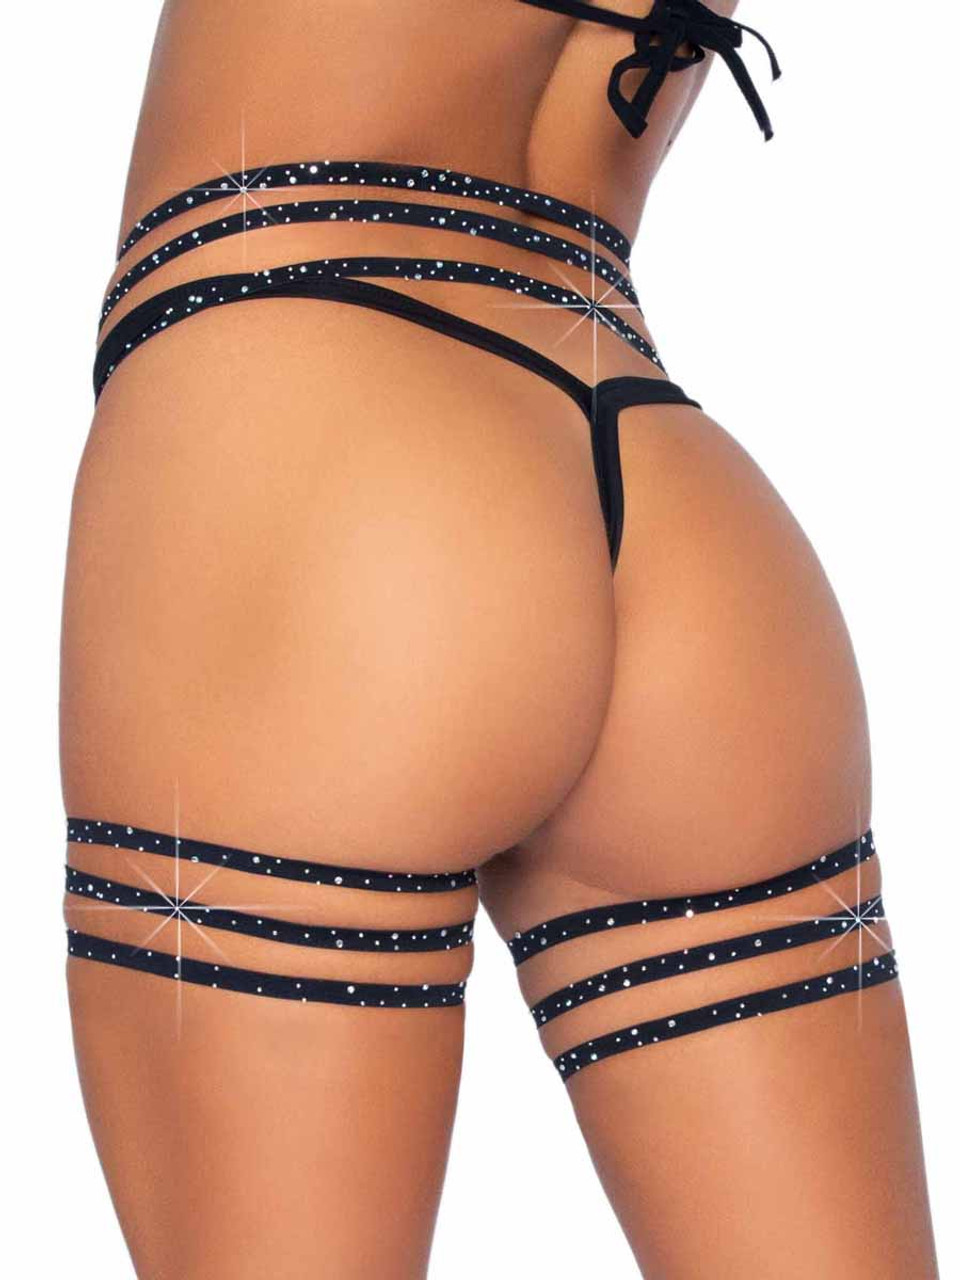 Ass Up Fishnet Tights – iHeartRaves